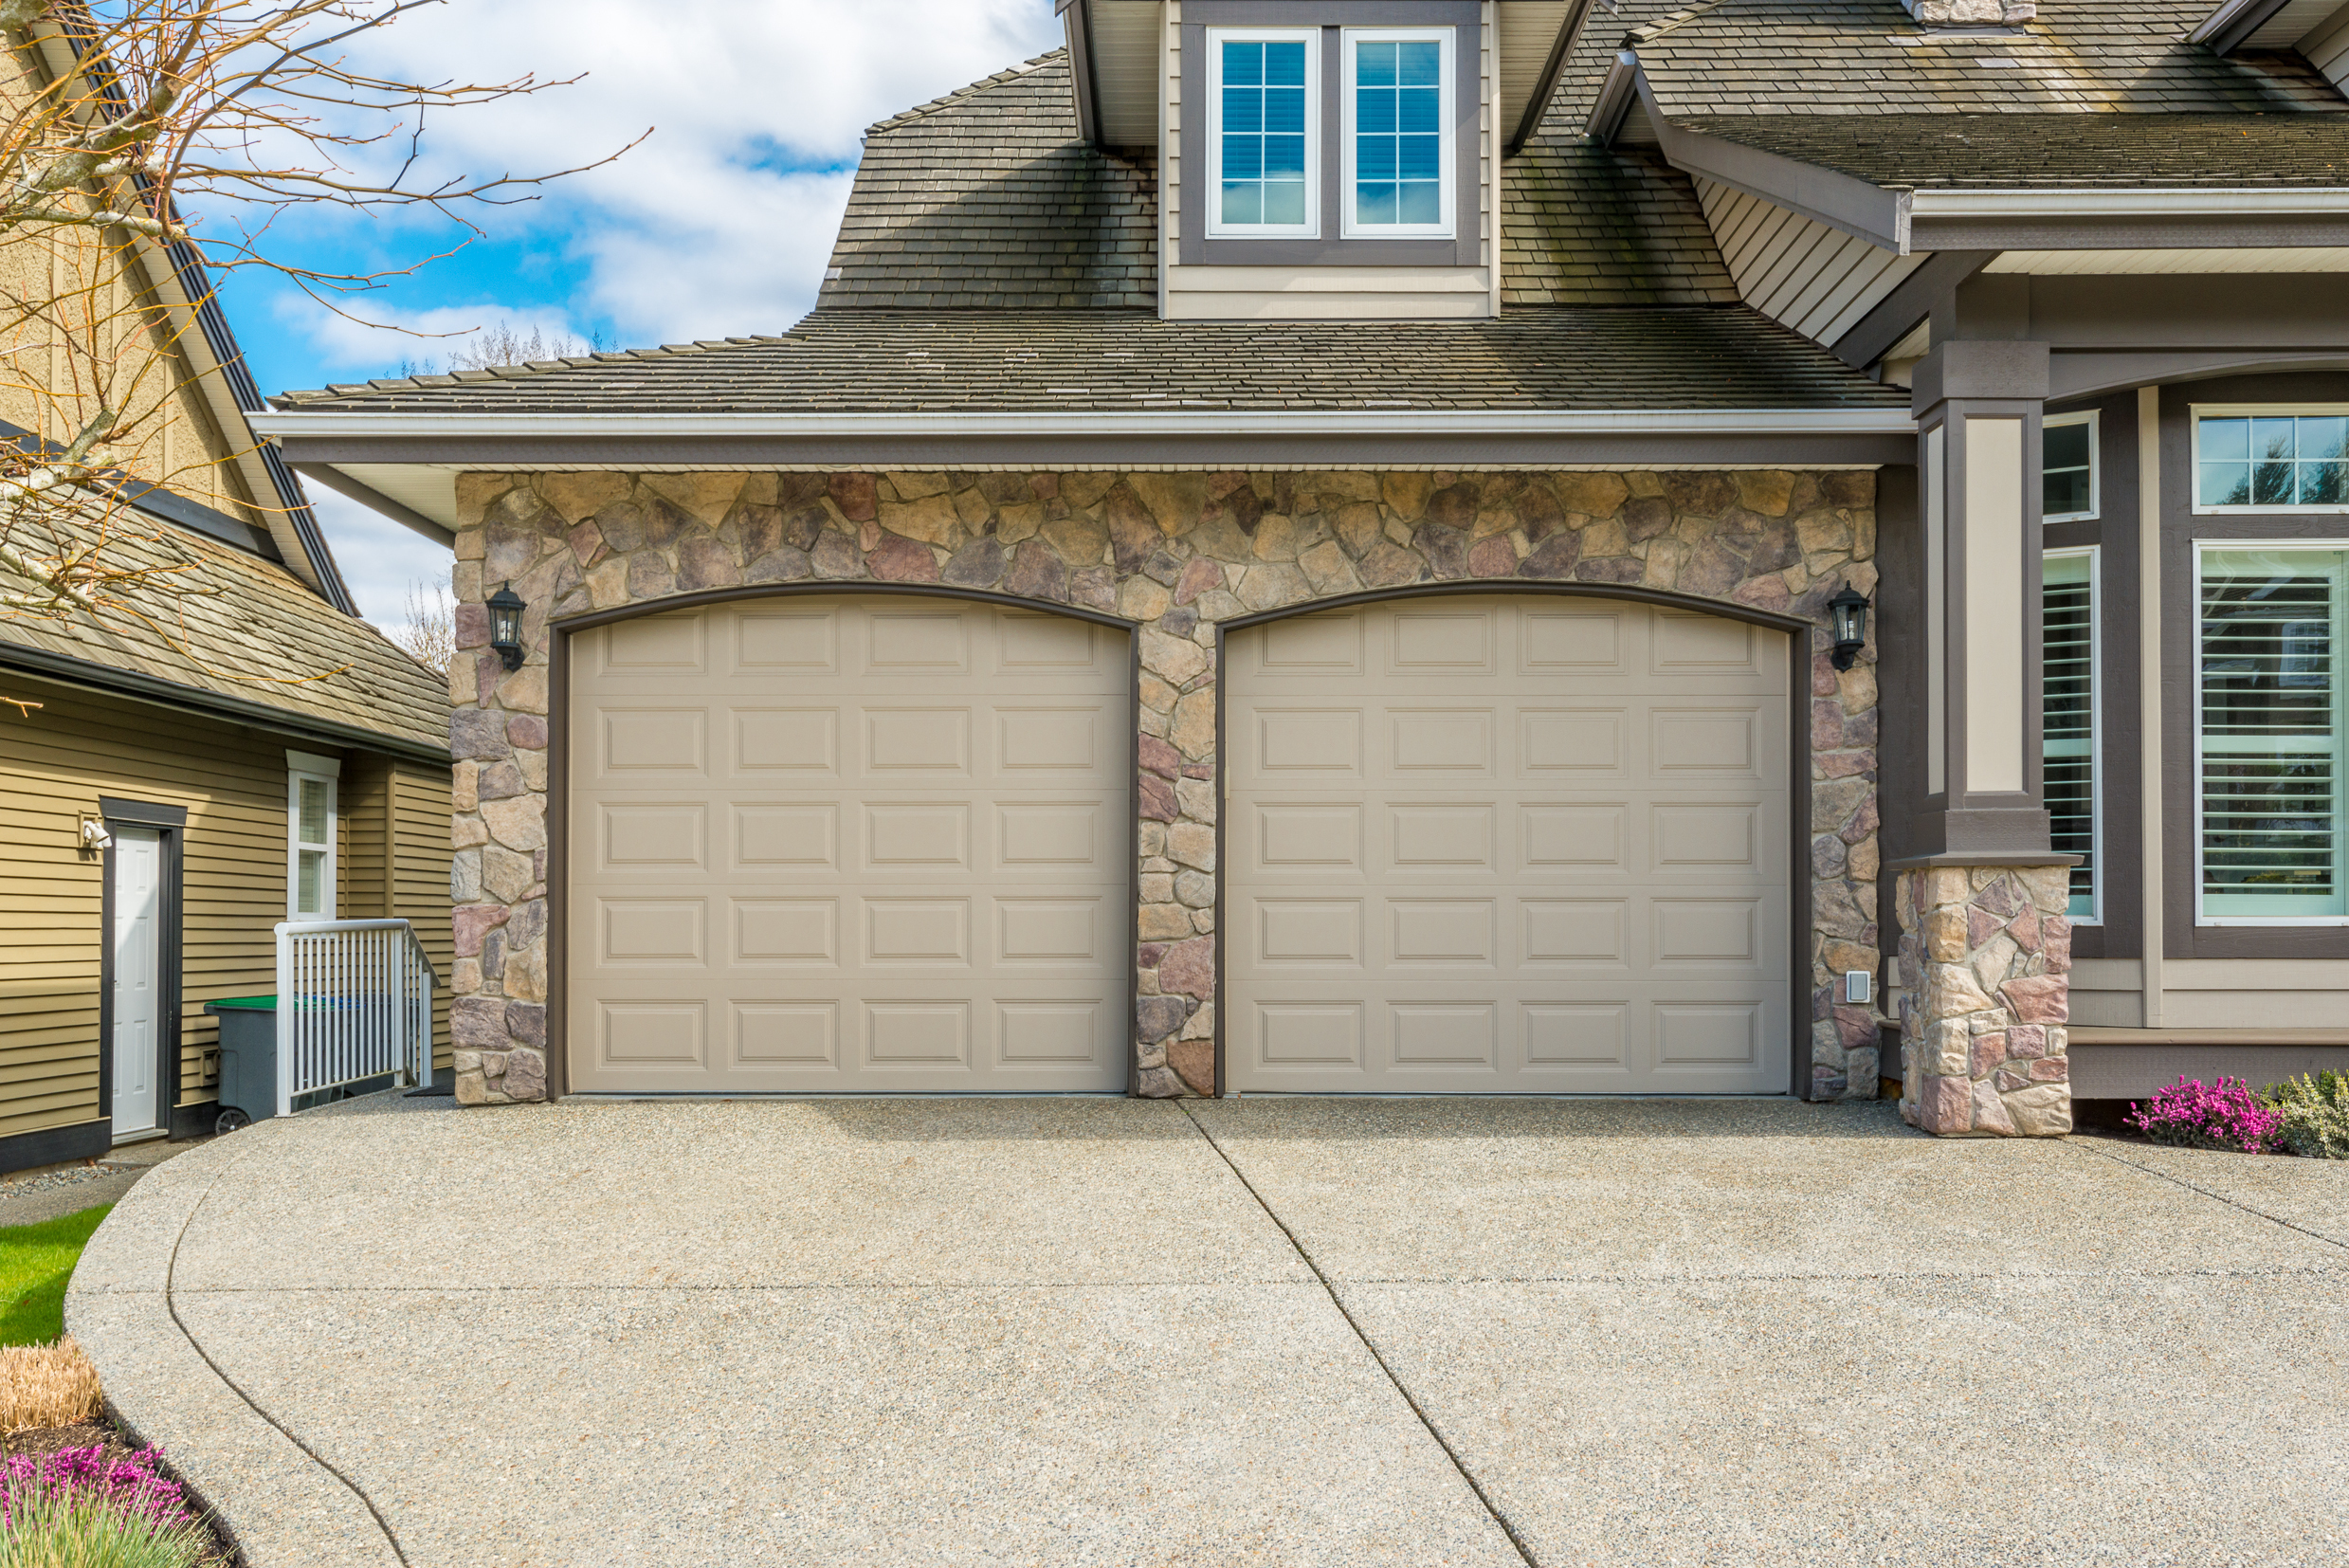 Two-car garage with tan paneled garage doors, attached to large house.